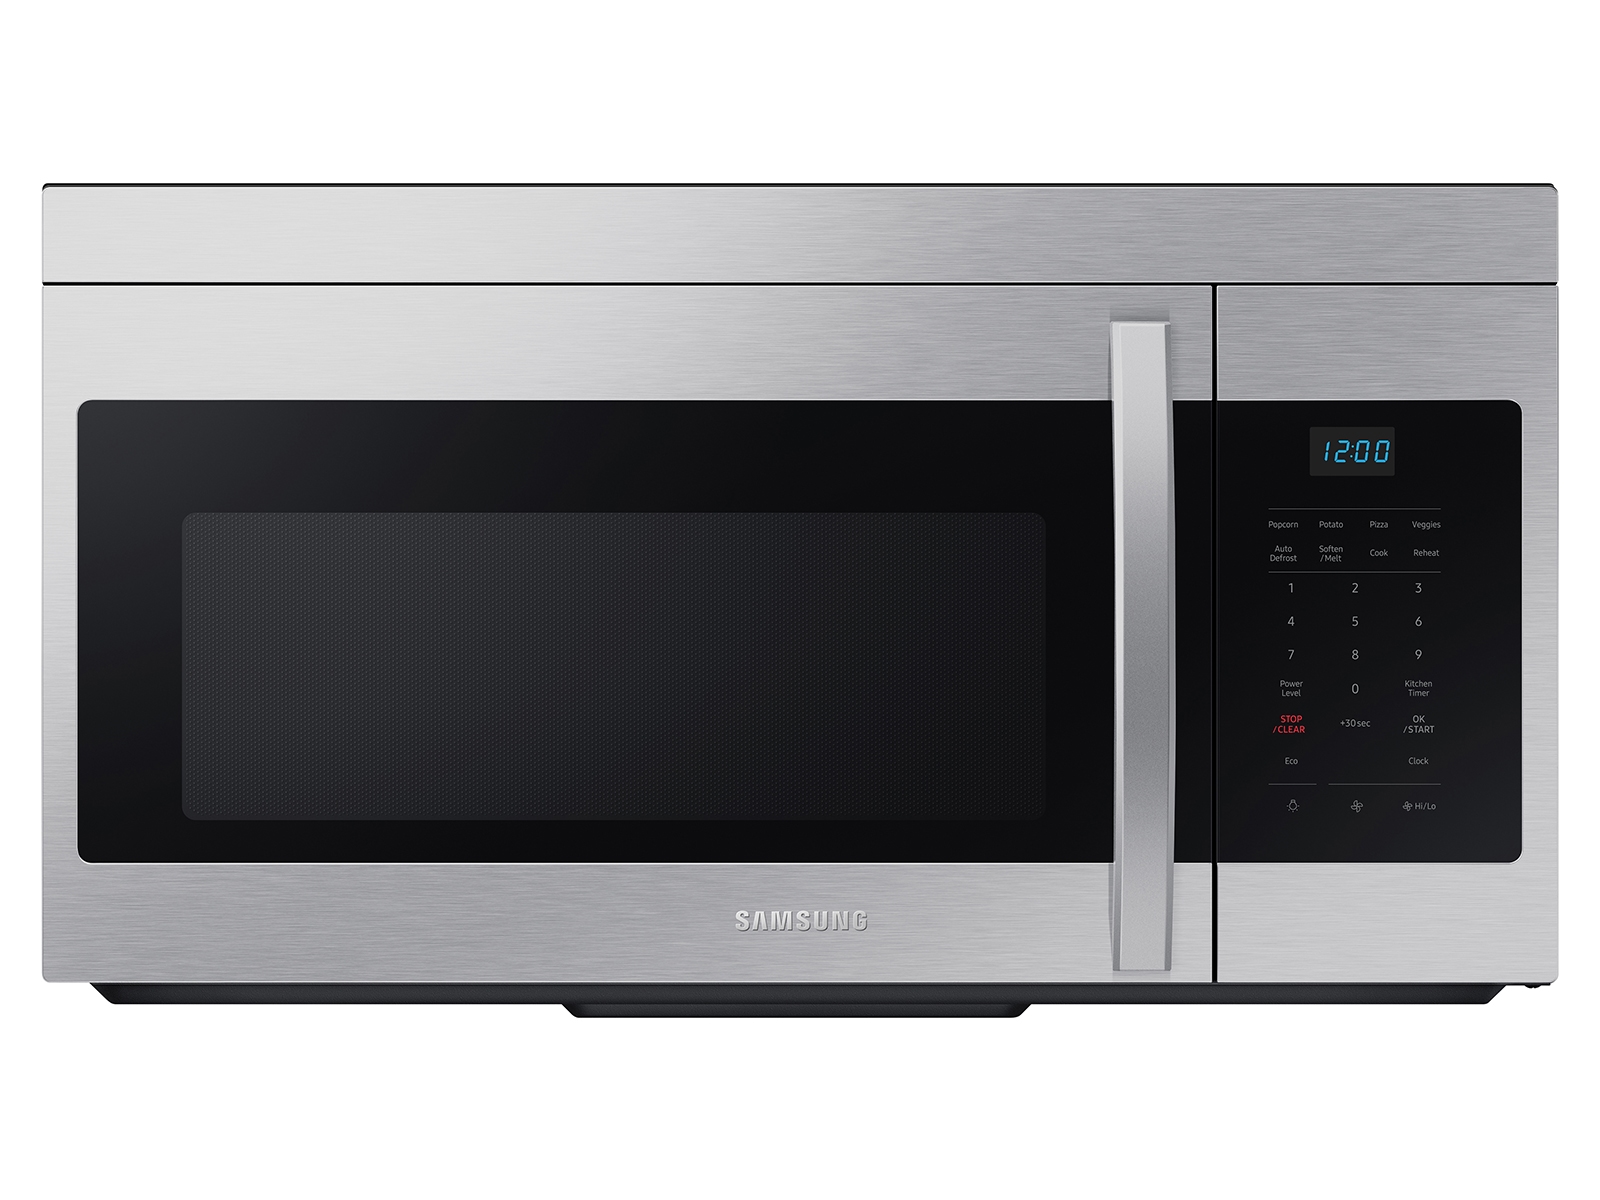 Samsung 1.6 cu. ft. Over-the-Range Microwave with Auto Cook in Stainless Steel(ME16A4021AS/AA)